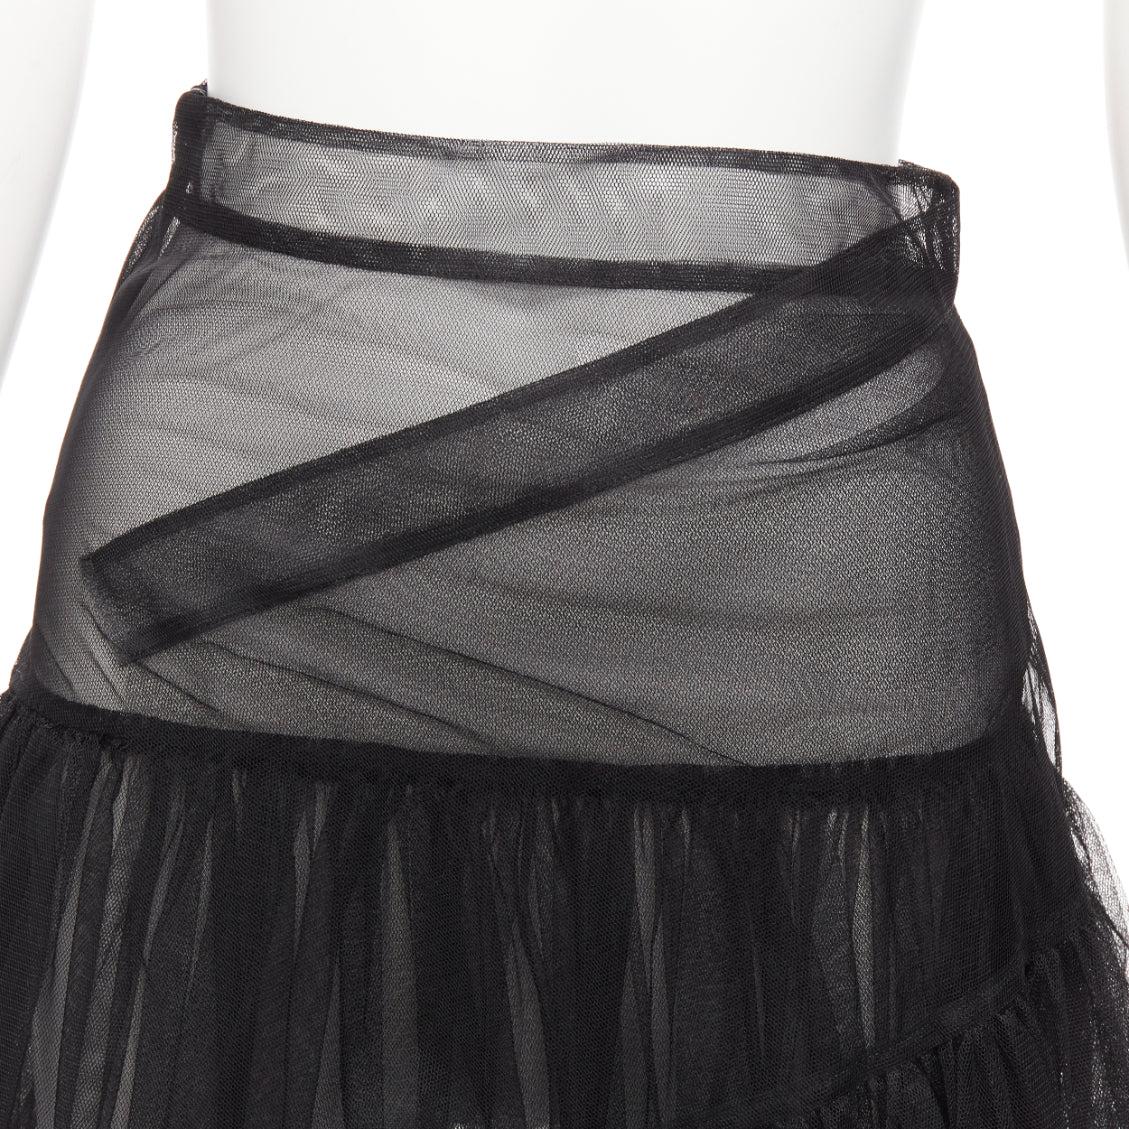 SHUSHU TONG black tulle asymmetric top high low hem A-line tutu skirt UK6 XS
Reference: AAWC/A01266
Brand: Shushu Tong
Material: Polyester
Color: Black
Pattern: Solid
Closure: Zip
Lining: Black Polyester
Extra Details: Side zip.
Made in: